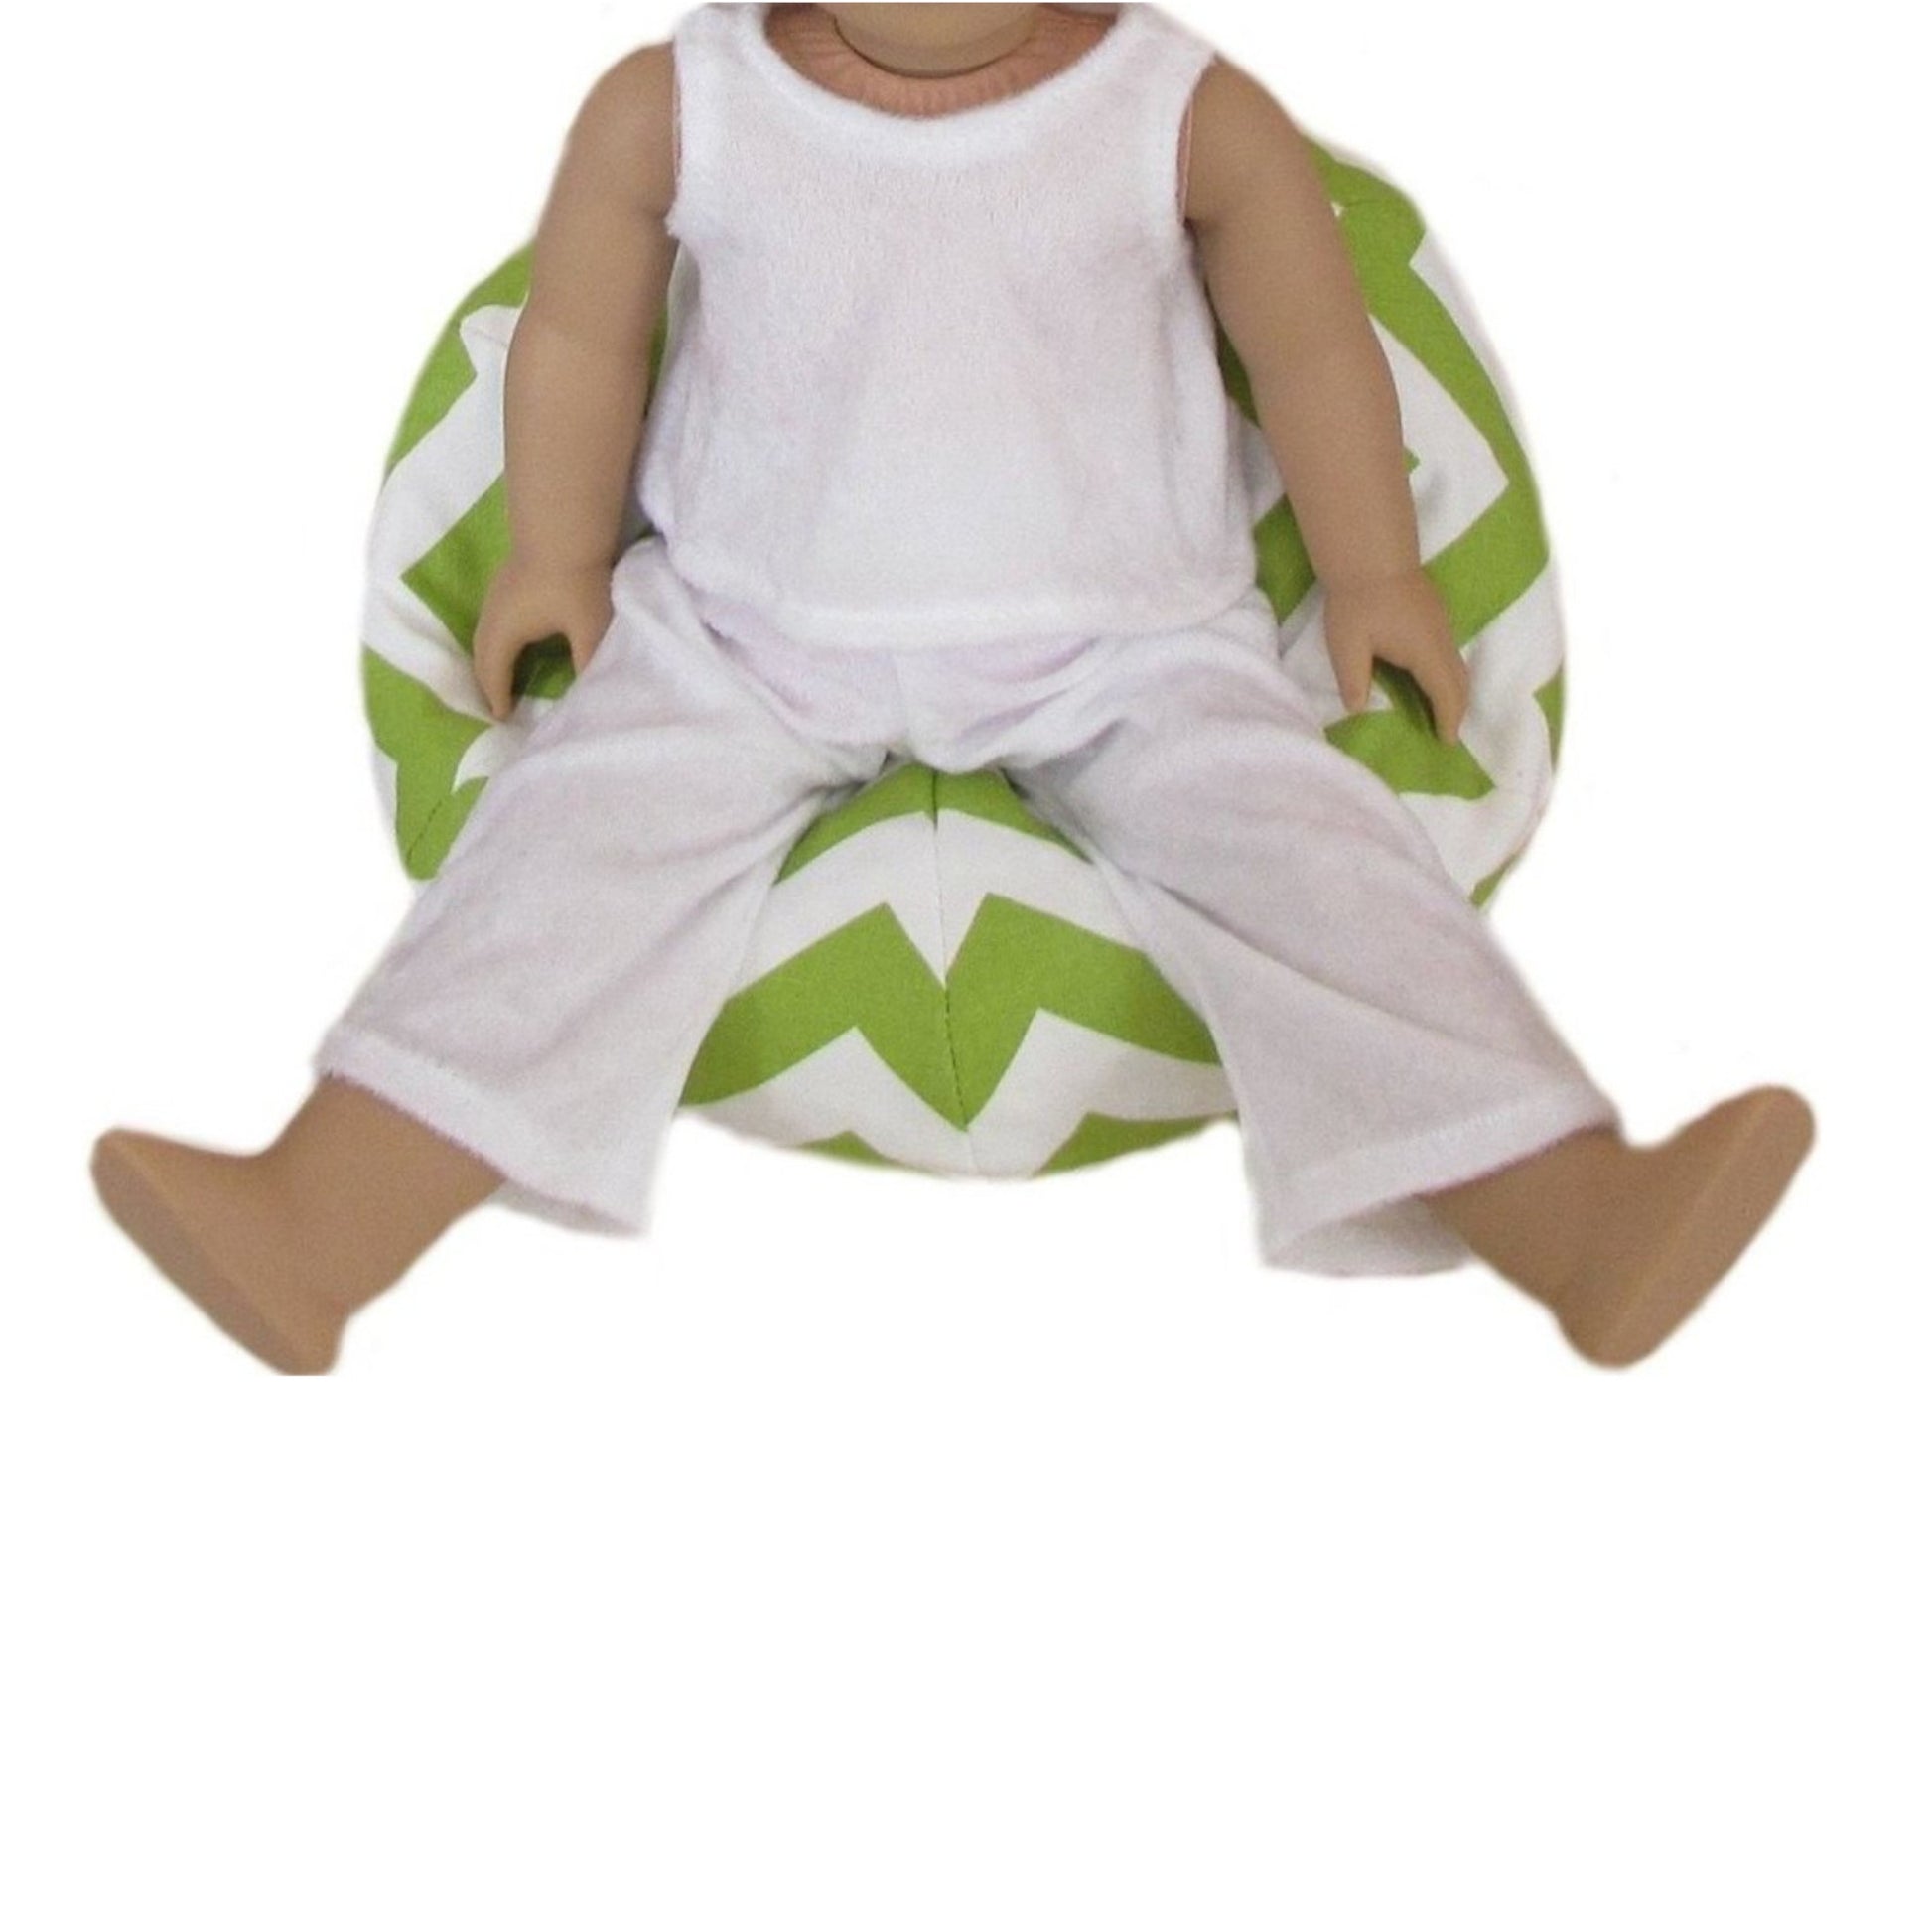 Green Chevron Doll Bean Bag Chair for 18-inch dolls with doll